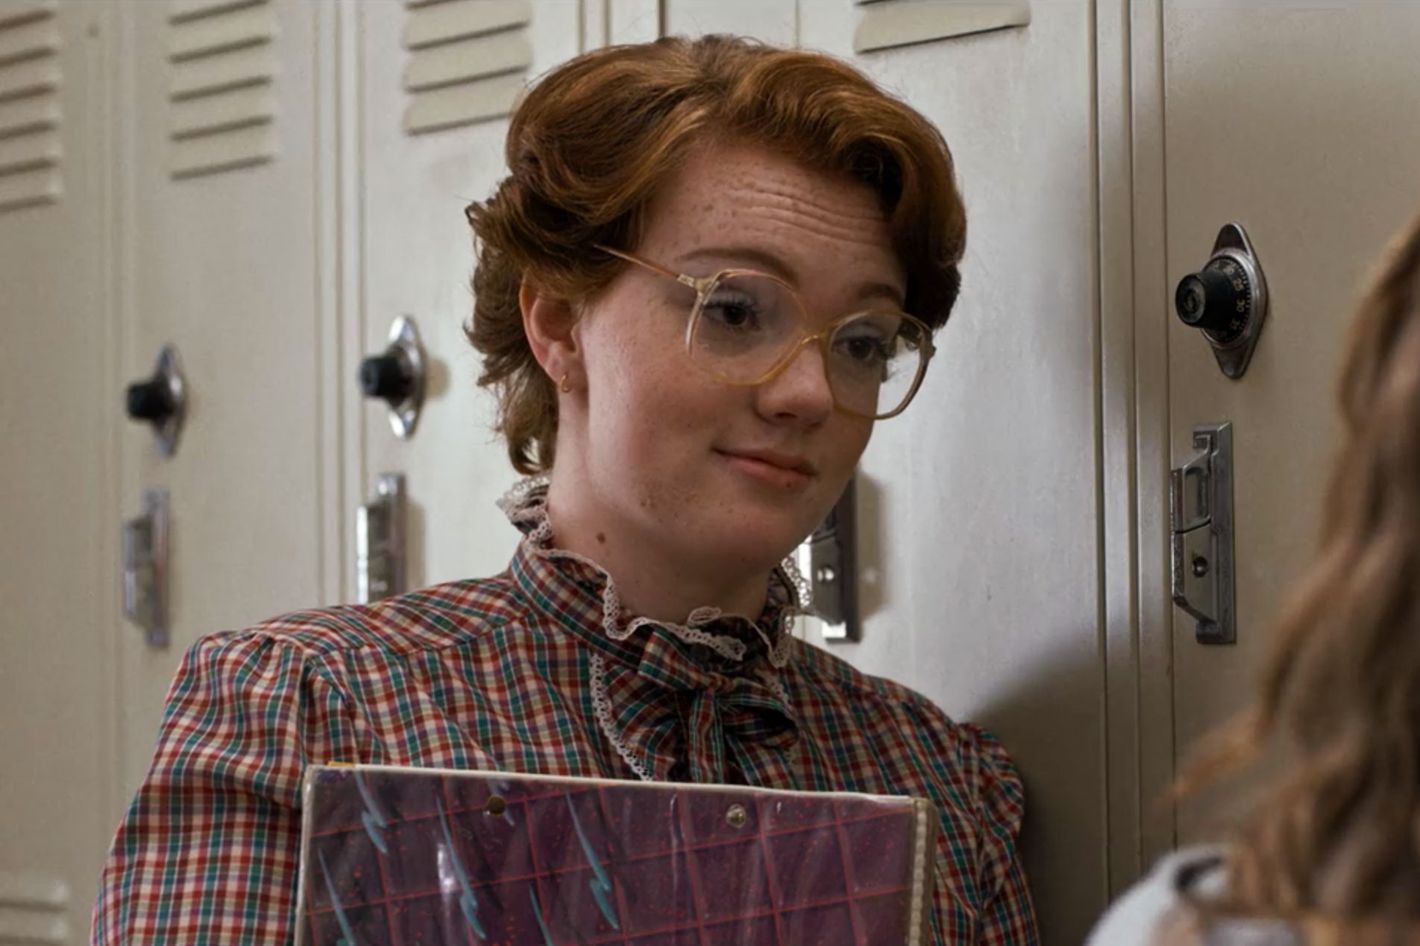 What Happened to Barb in 'Stranger Things'?